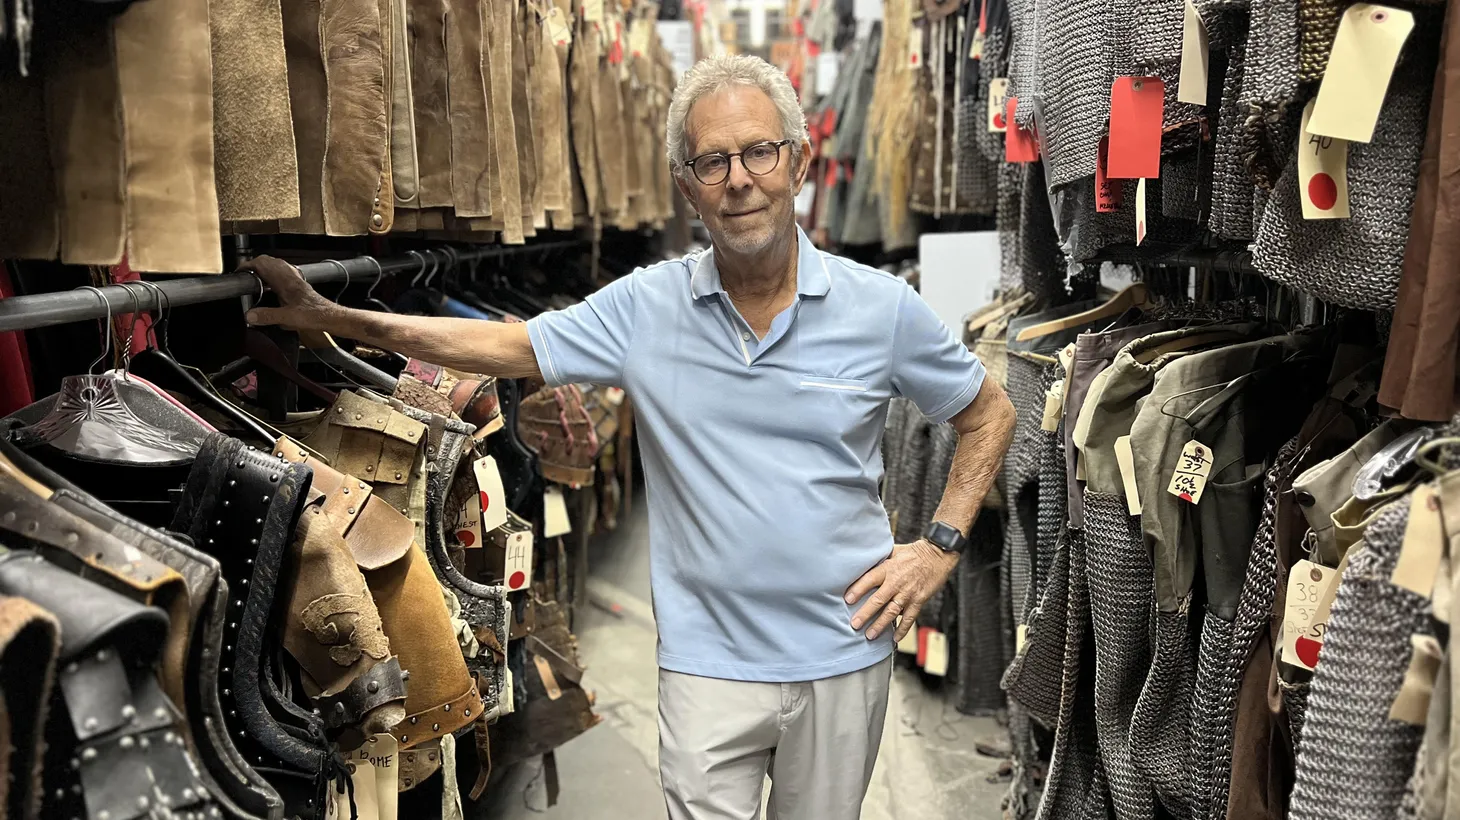 “We laid off 45 people,” Eddie Marks, president of the Western Costume Company in North Hollywood. “Once the actors went on strike, there was no other alternative for us other than to do a complete shutdown.”